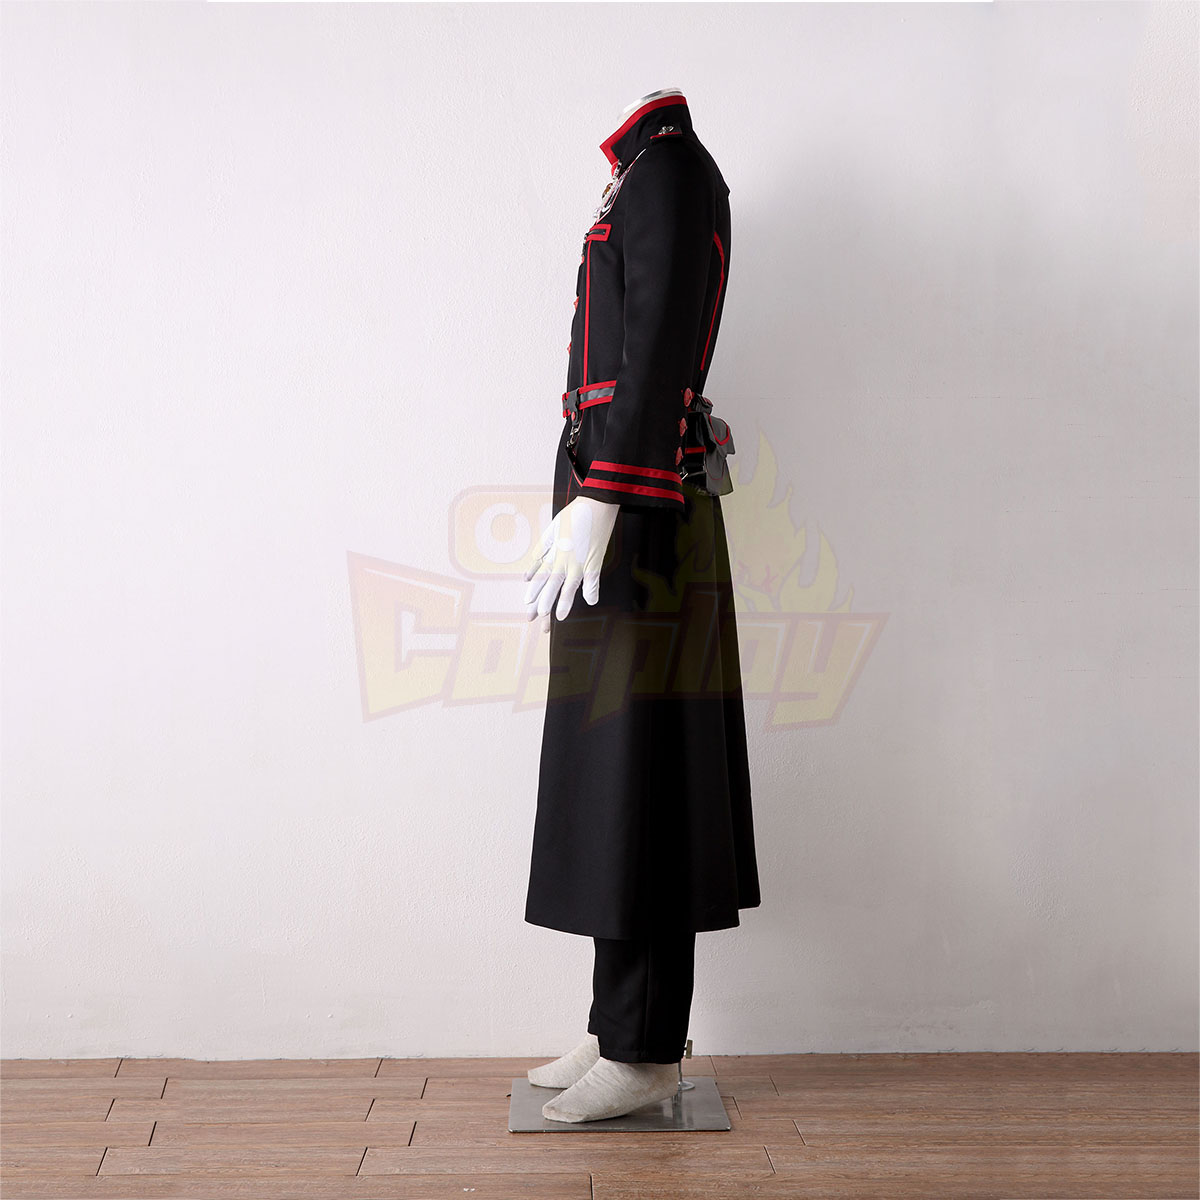 D.Gray-man Yu Kanda 3RD Cosplay Costumes Deluxe Edition [E121]